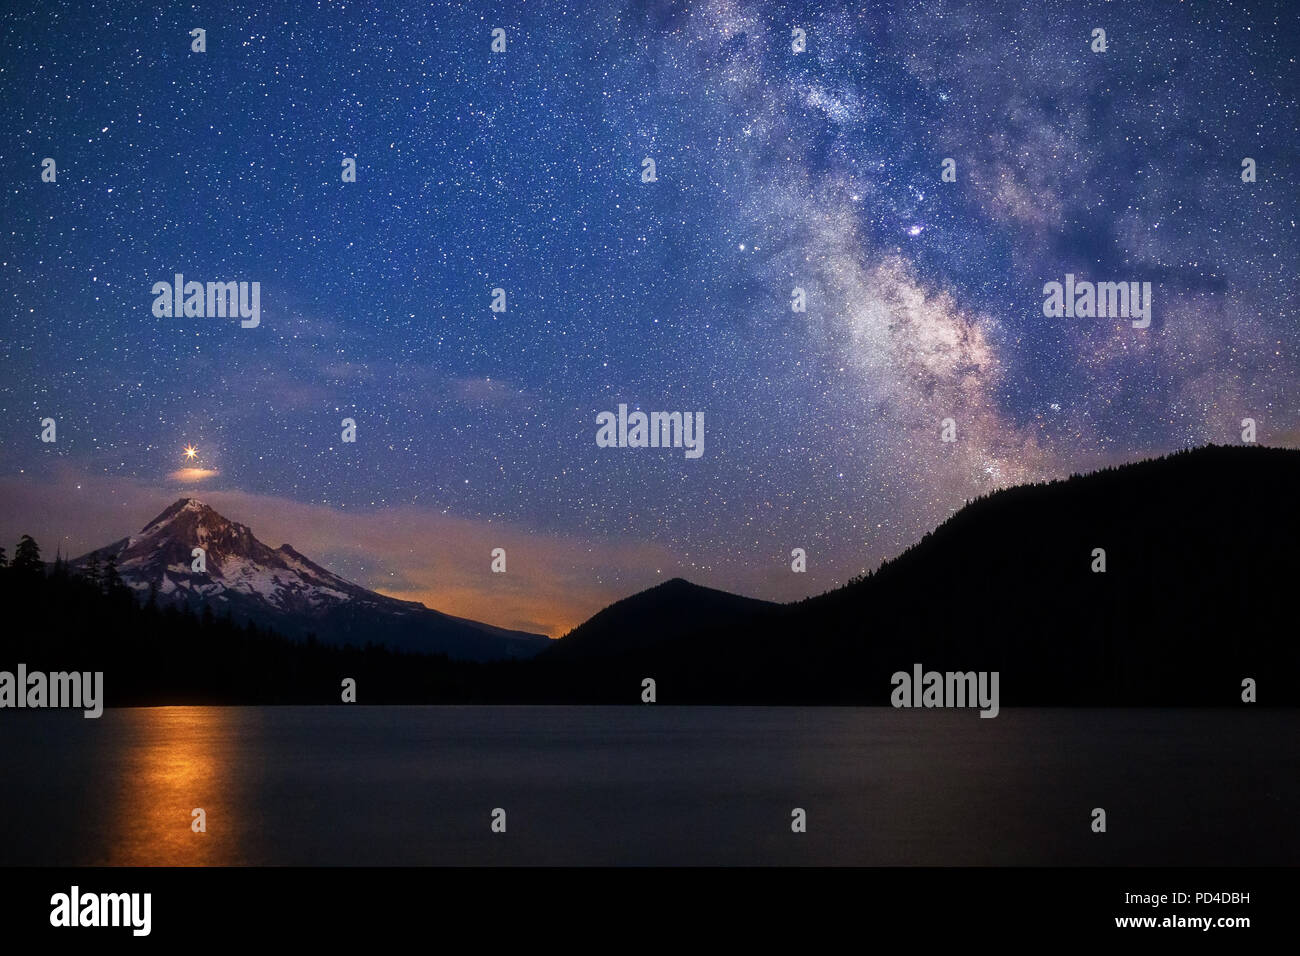 Mars rising above Mt. Hood with the Milky Way and starry night sky from Lost Lake, Oregon, USA Stock Photo